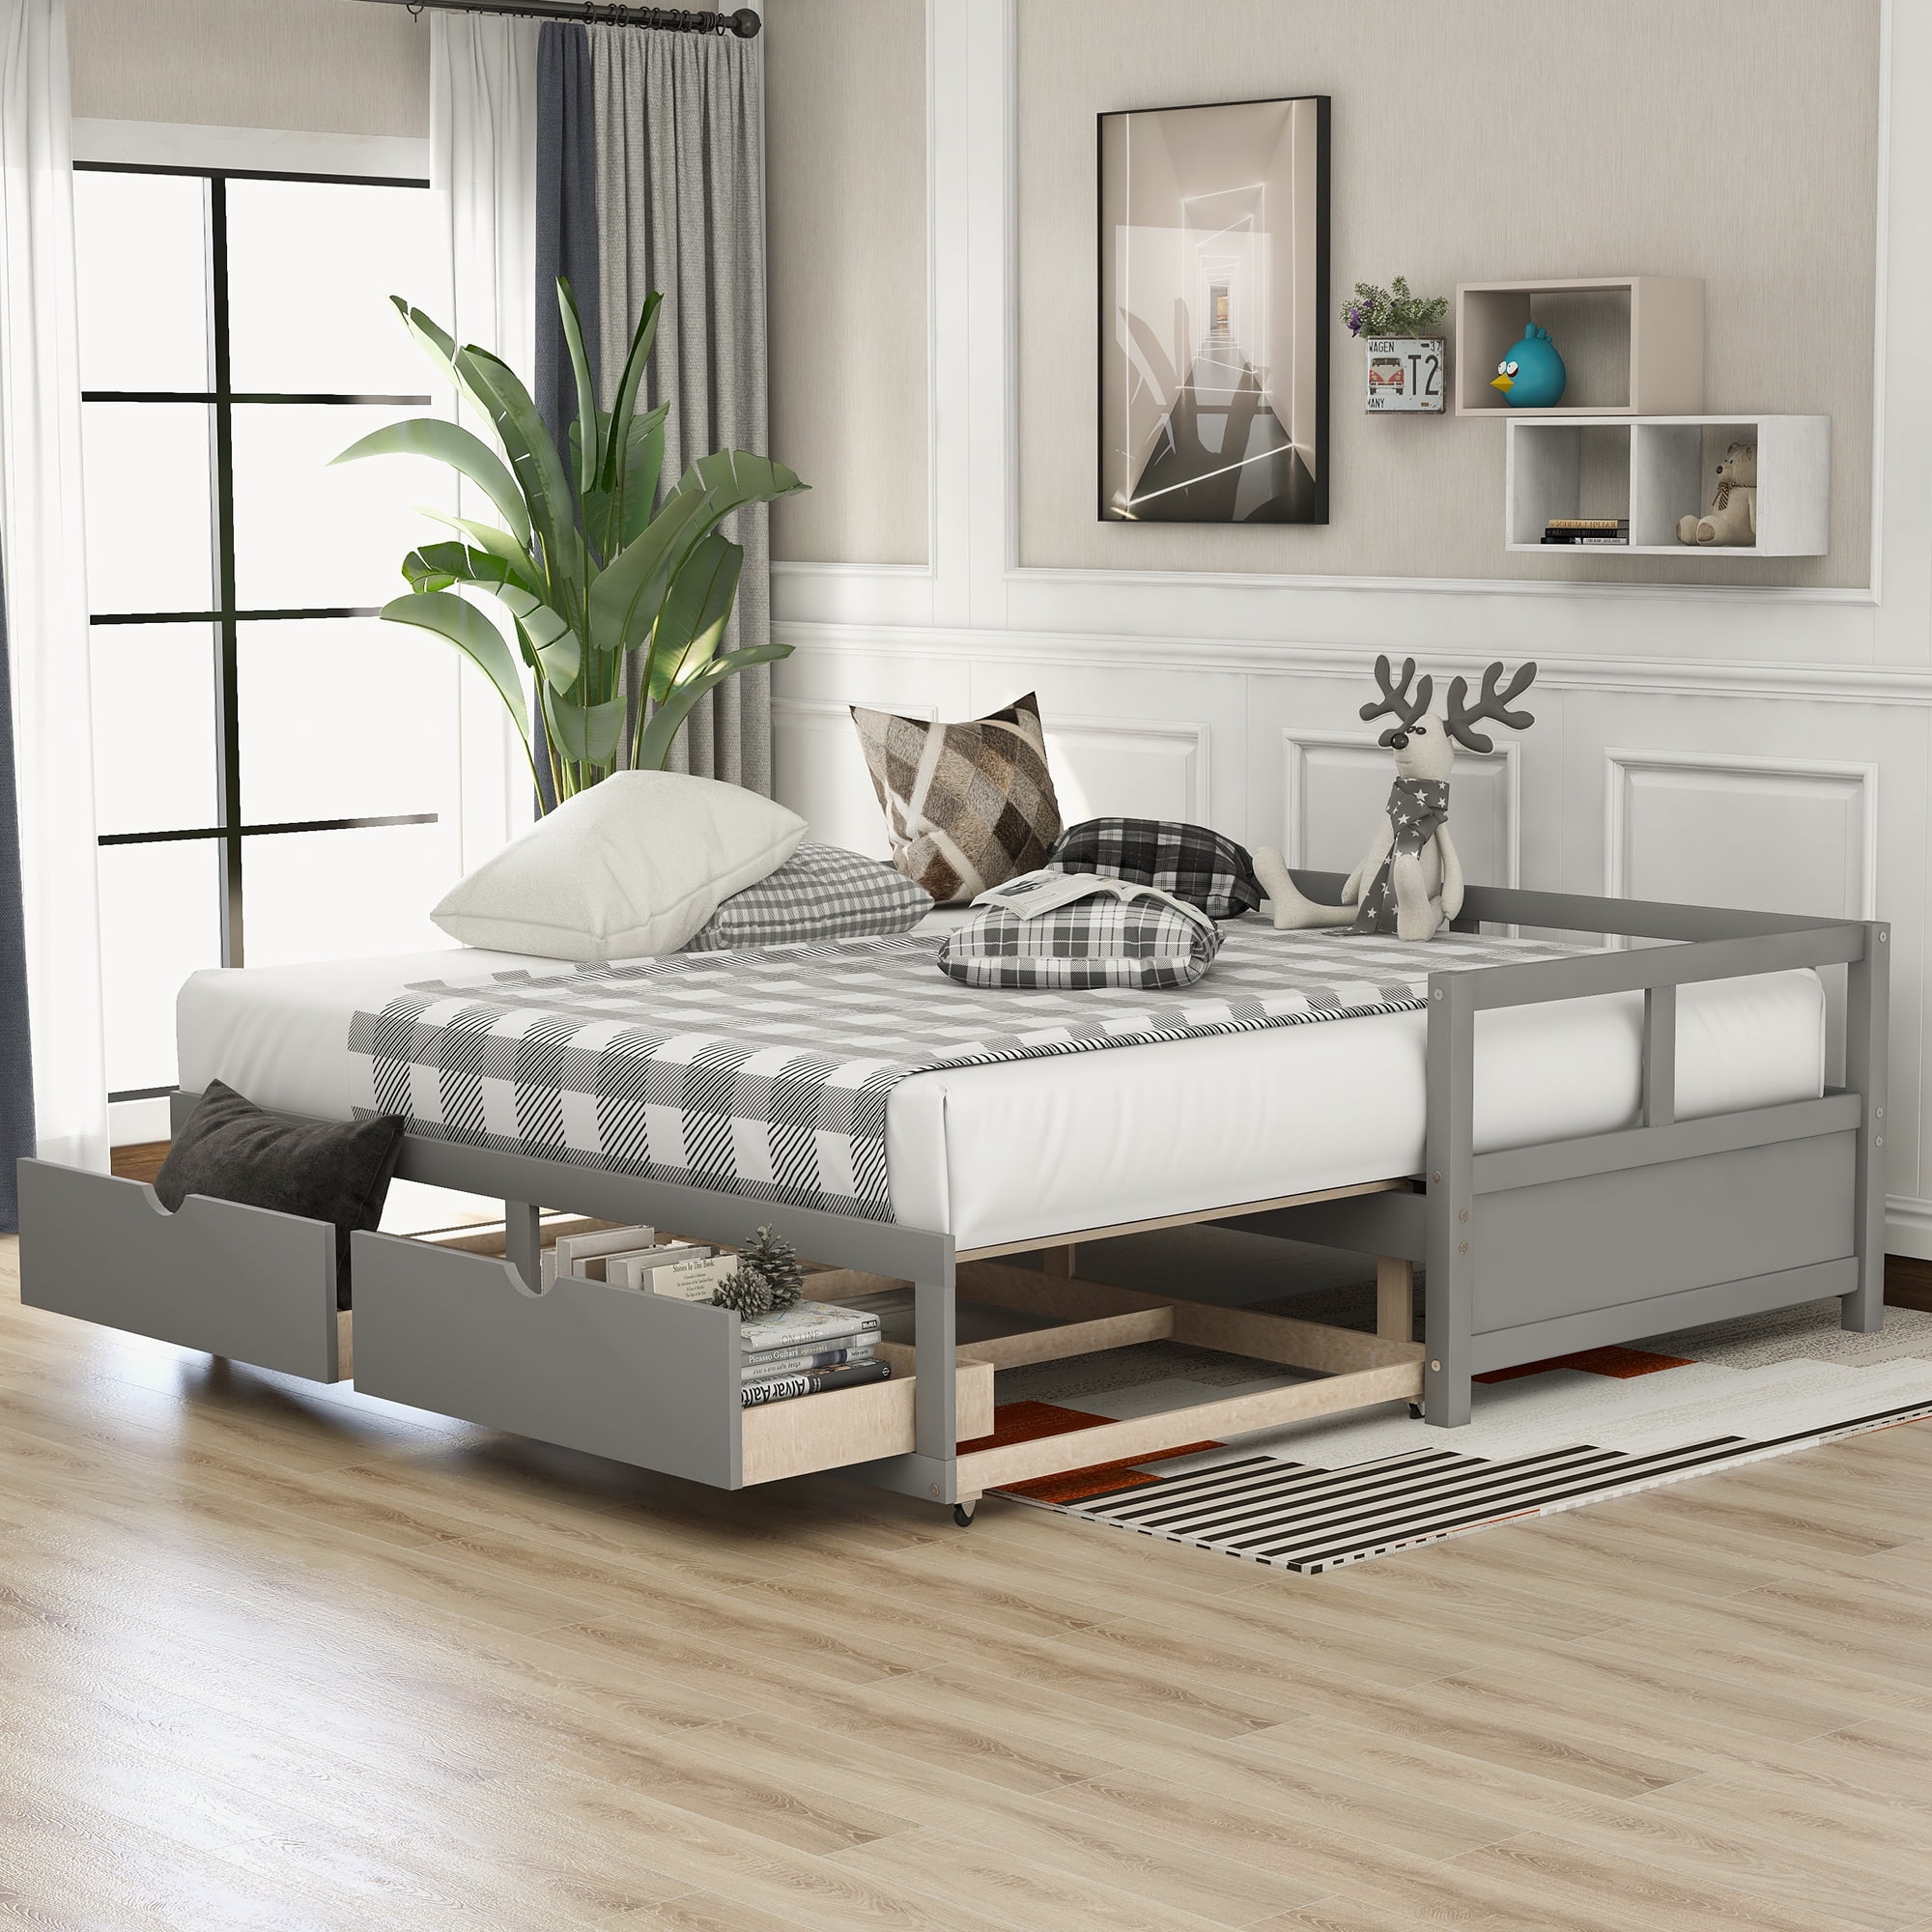 Twin Daybed With Trundle Bed And Two, Pull Out Sofa Bed Frame